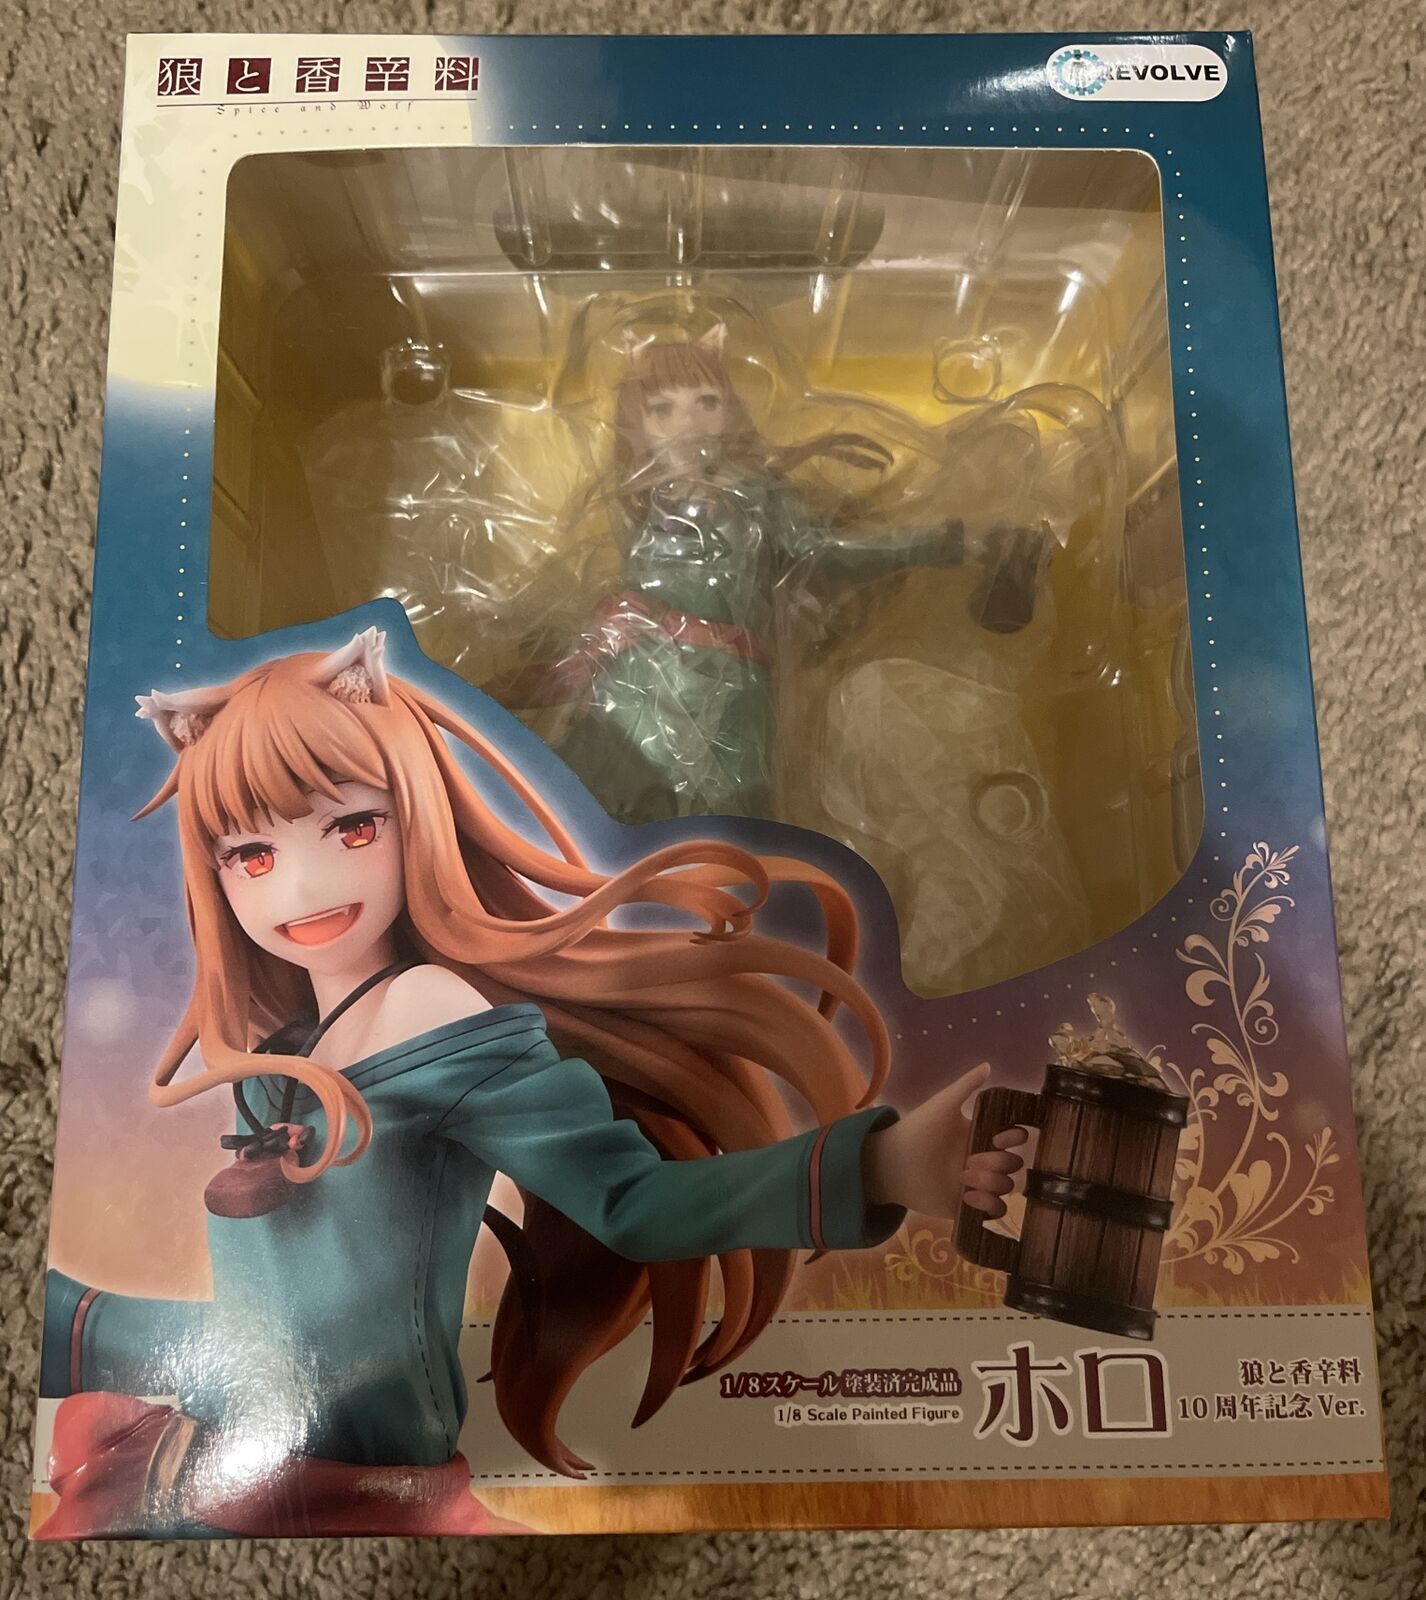 REVOLVE Spice and Wolf figure Holo 10th Anniversary Ver. 1/8 scale